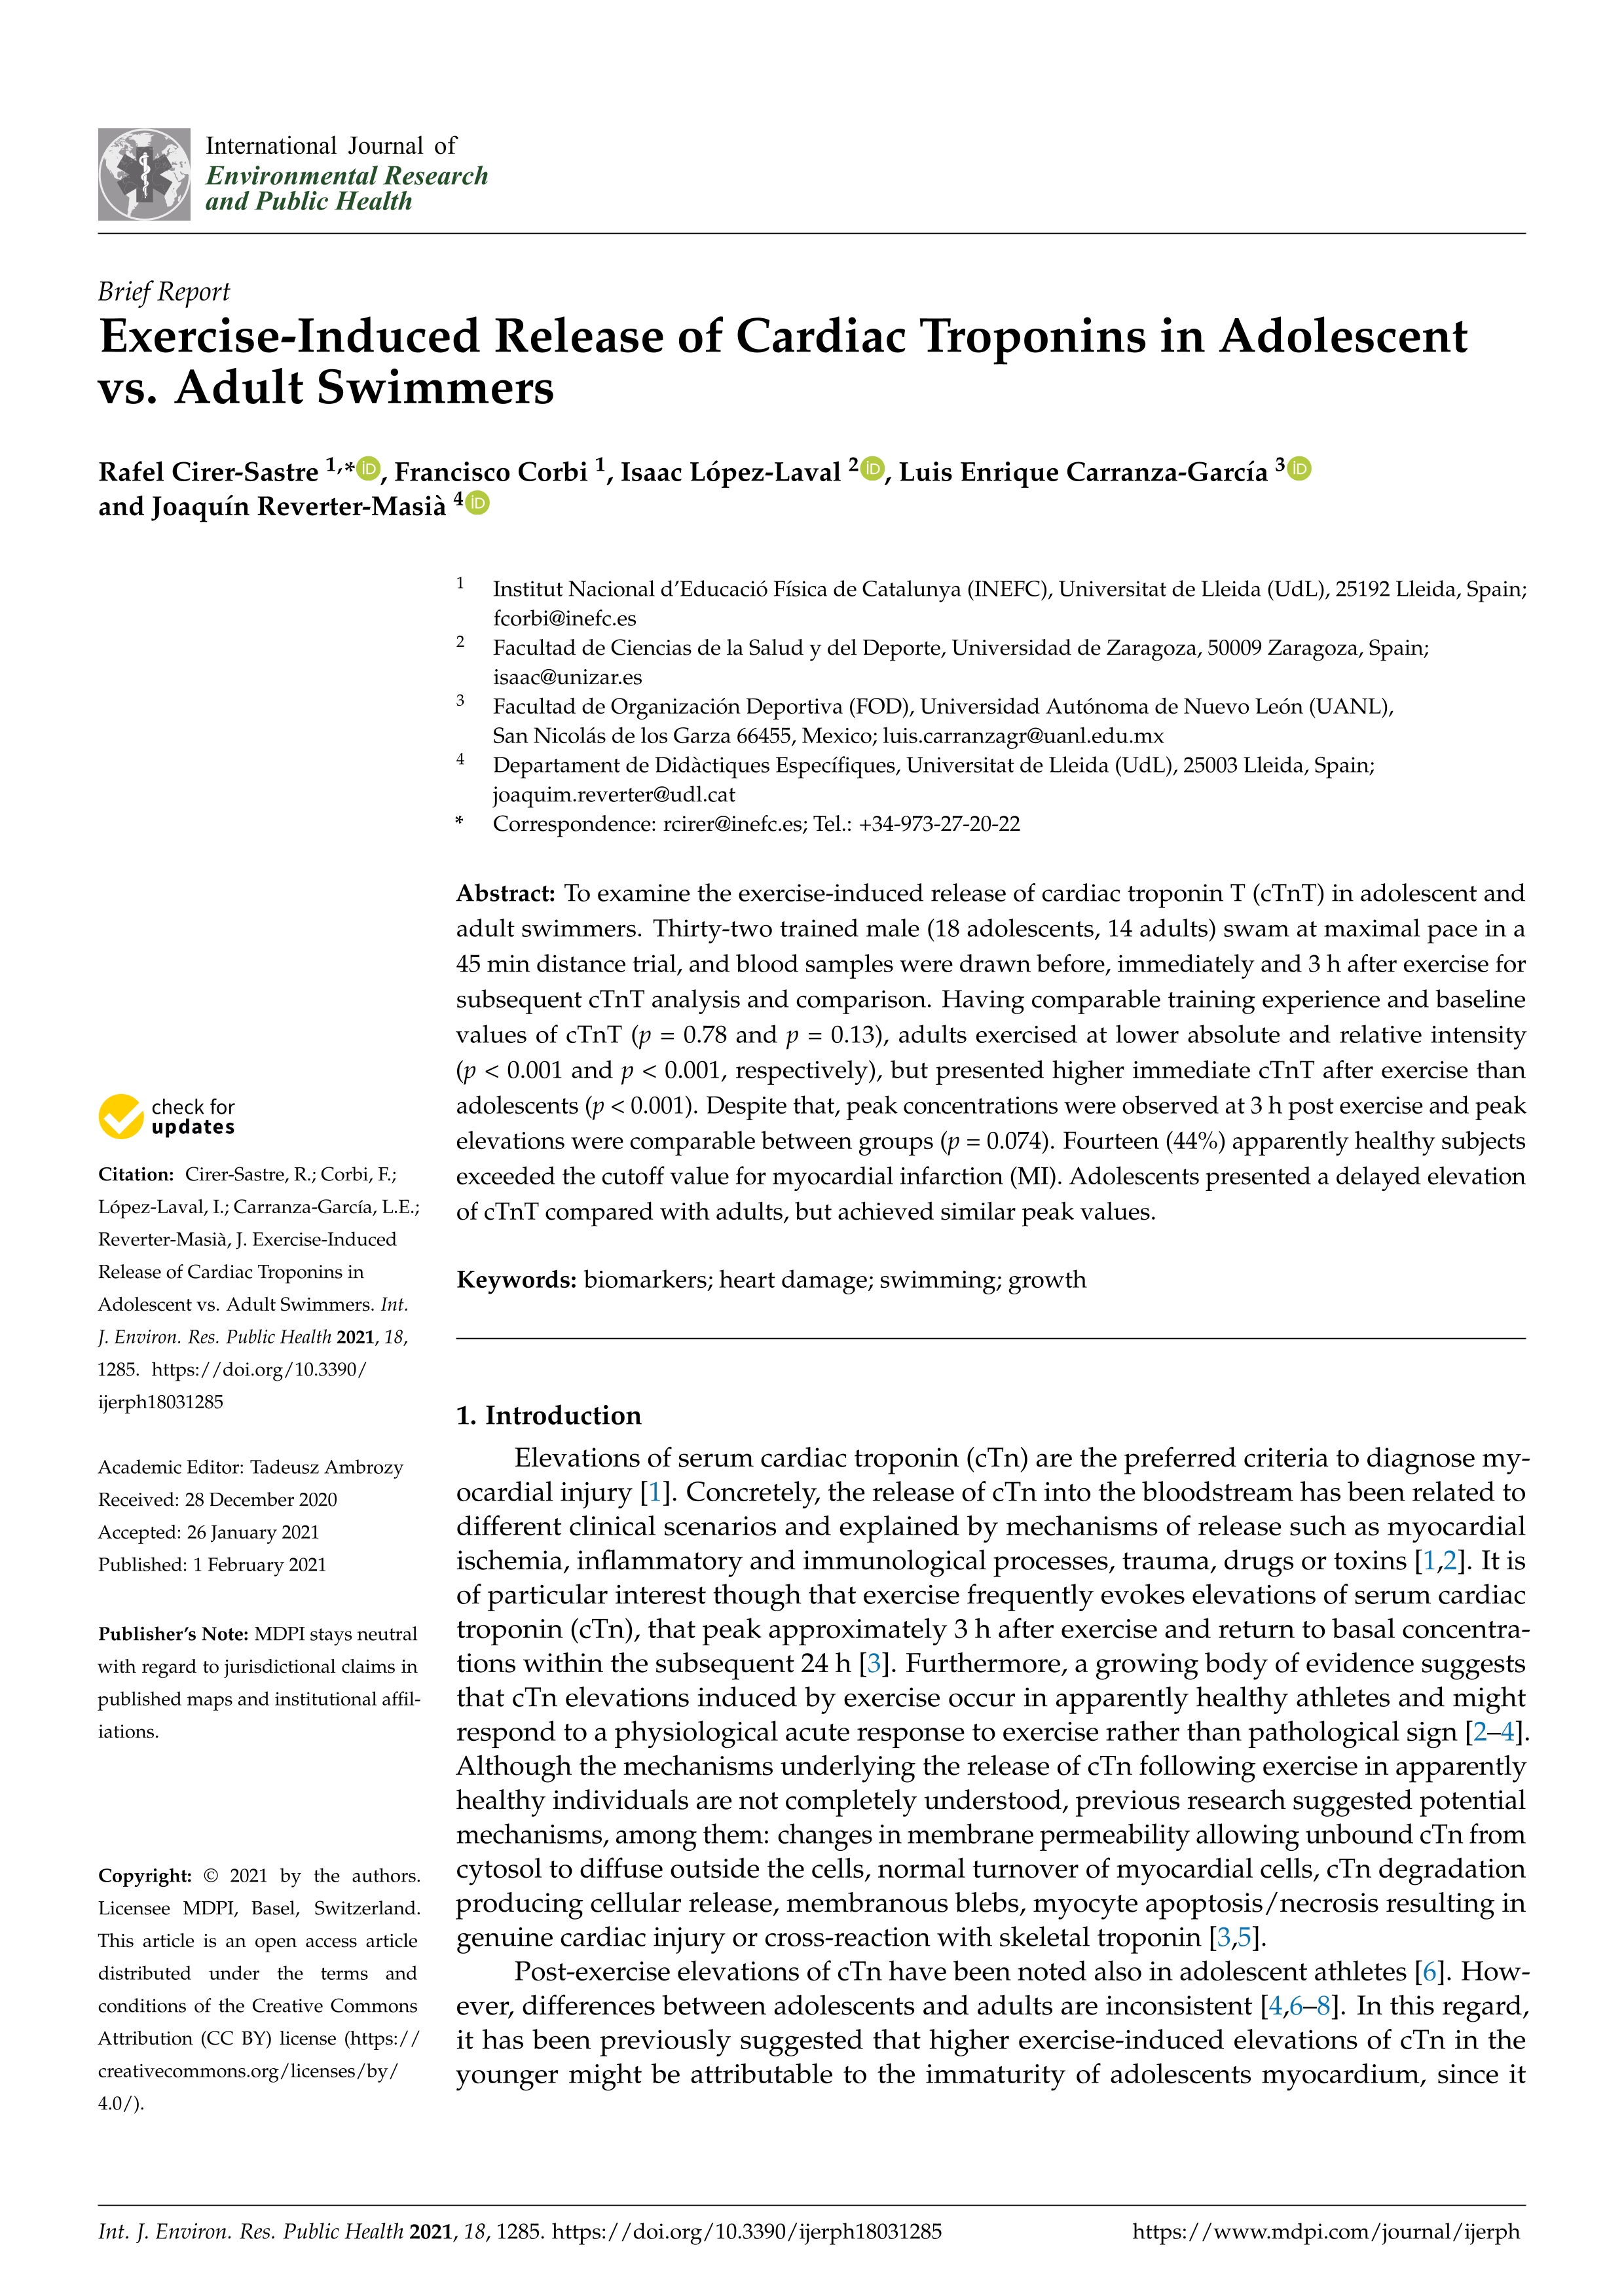 Exercise-induced release of cardiac troponins in adolescent vs. Adult swimmers